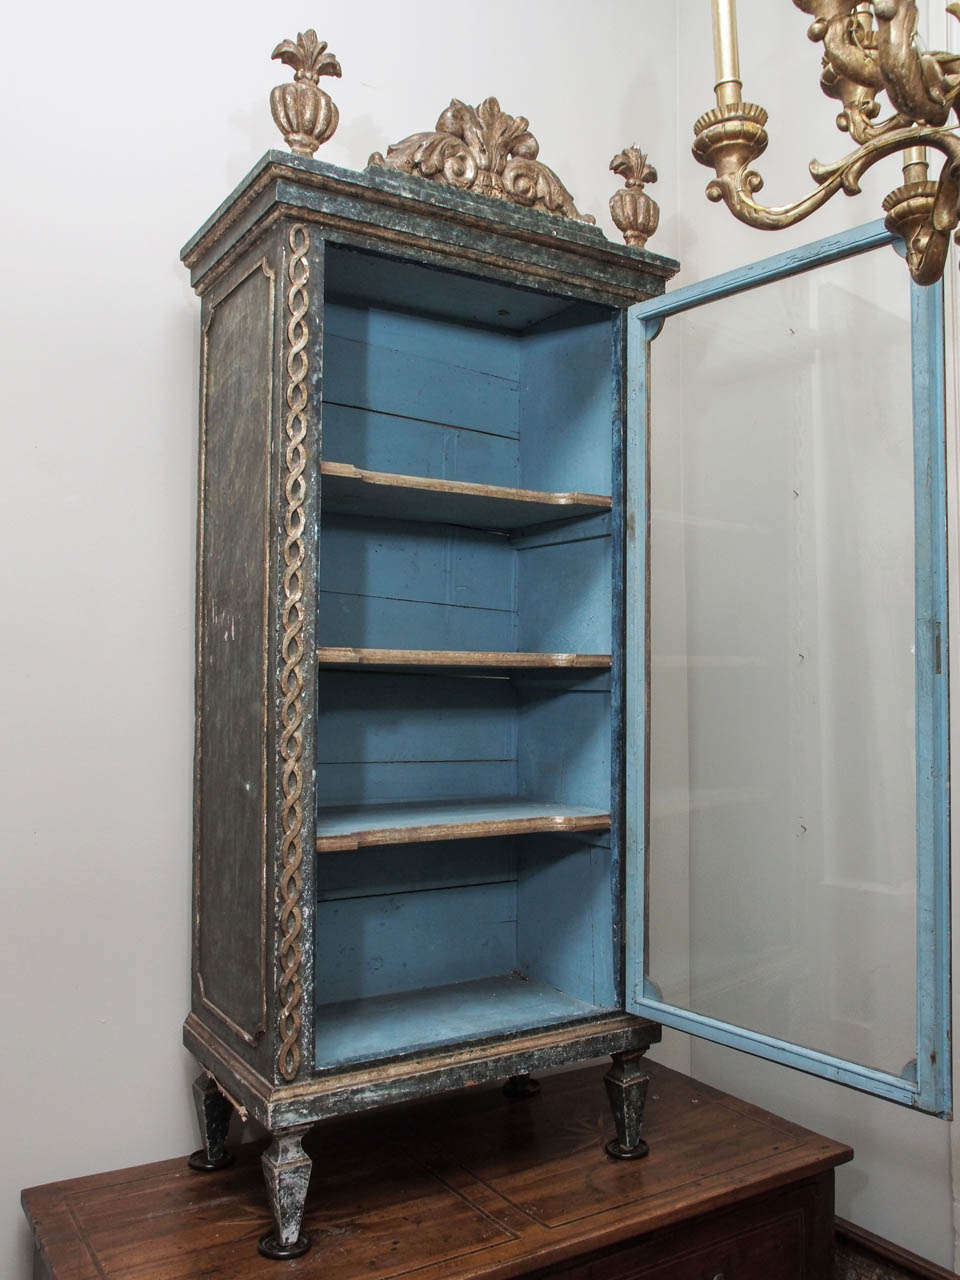 A petite, painted single door cabinet with silvered carving, topped with finials and a pierced cartouche.  The side panels, cornice and apron are molded, and the piece rests on tall, square, tapered feet.  Interiors shelves shaped and molded.